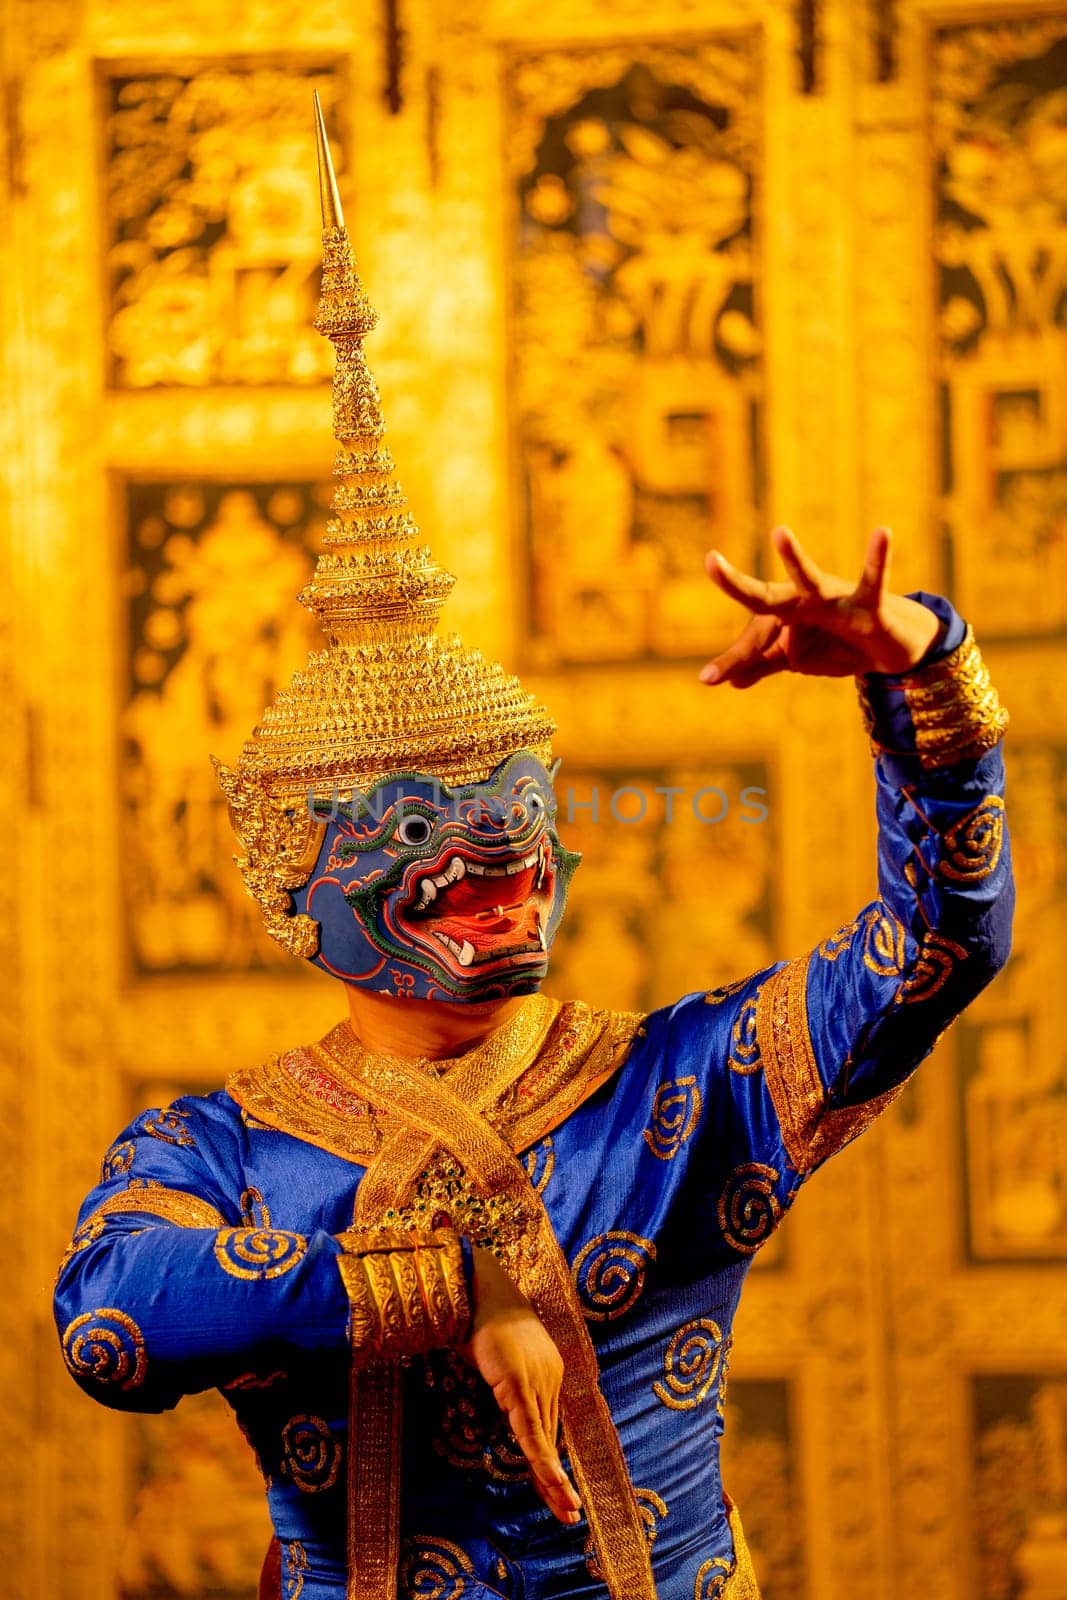 Portrait of Khon or traditional Thai classic masked from the Ramakien with character as blue giant and Thai paintings background in a public place.